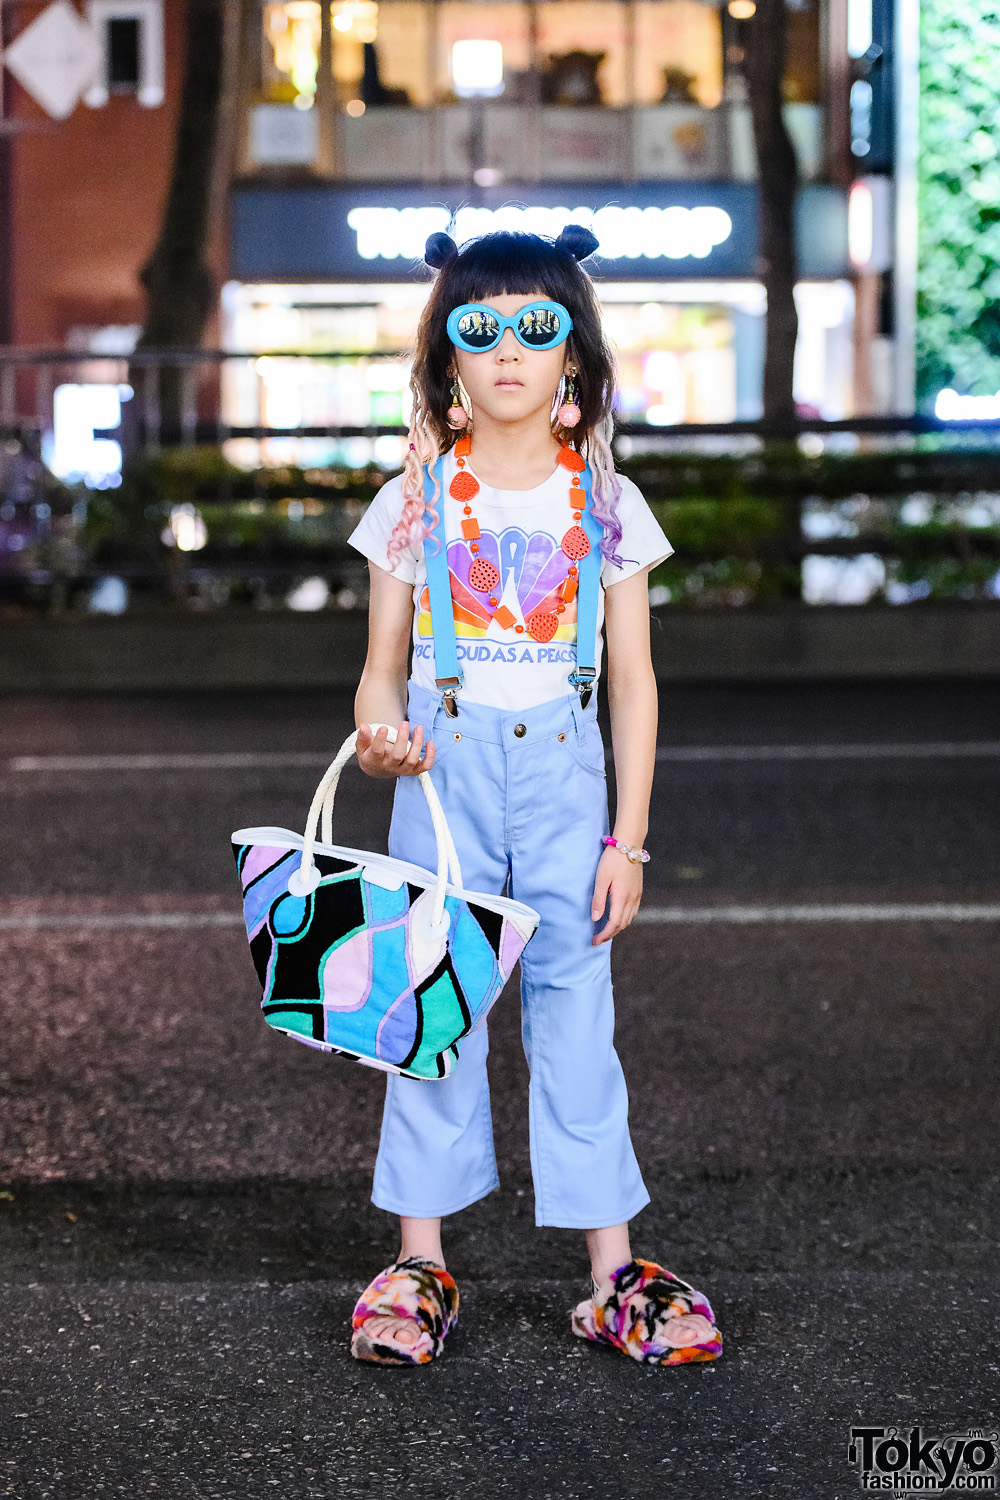 Harajuku Kid Honey Supply Vintage Street Style w/ Sons & Daughters Sunglasses, Vintage Levi's, Emilio Pucci Tote & Ugg Fuzzy Slippers